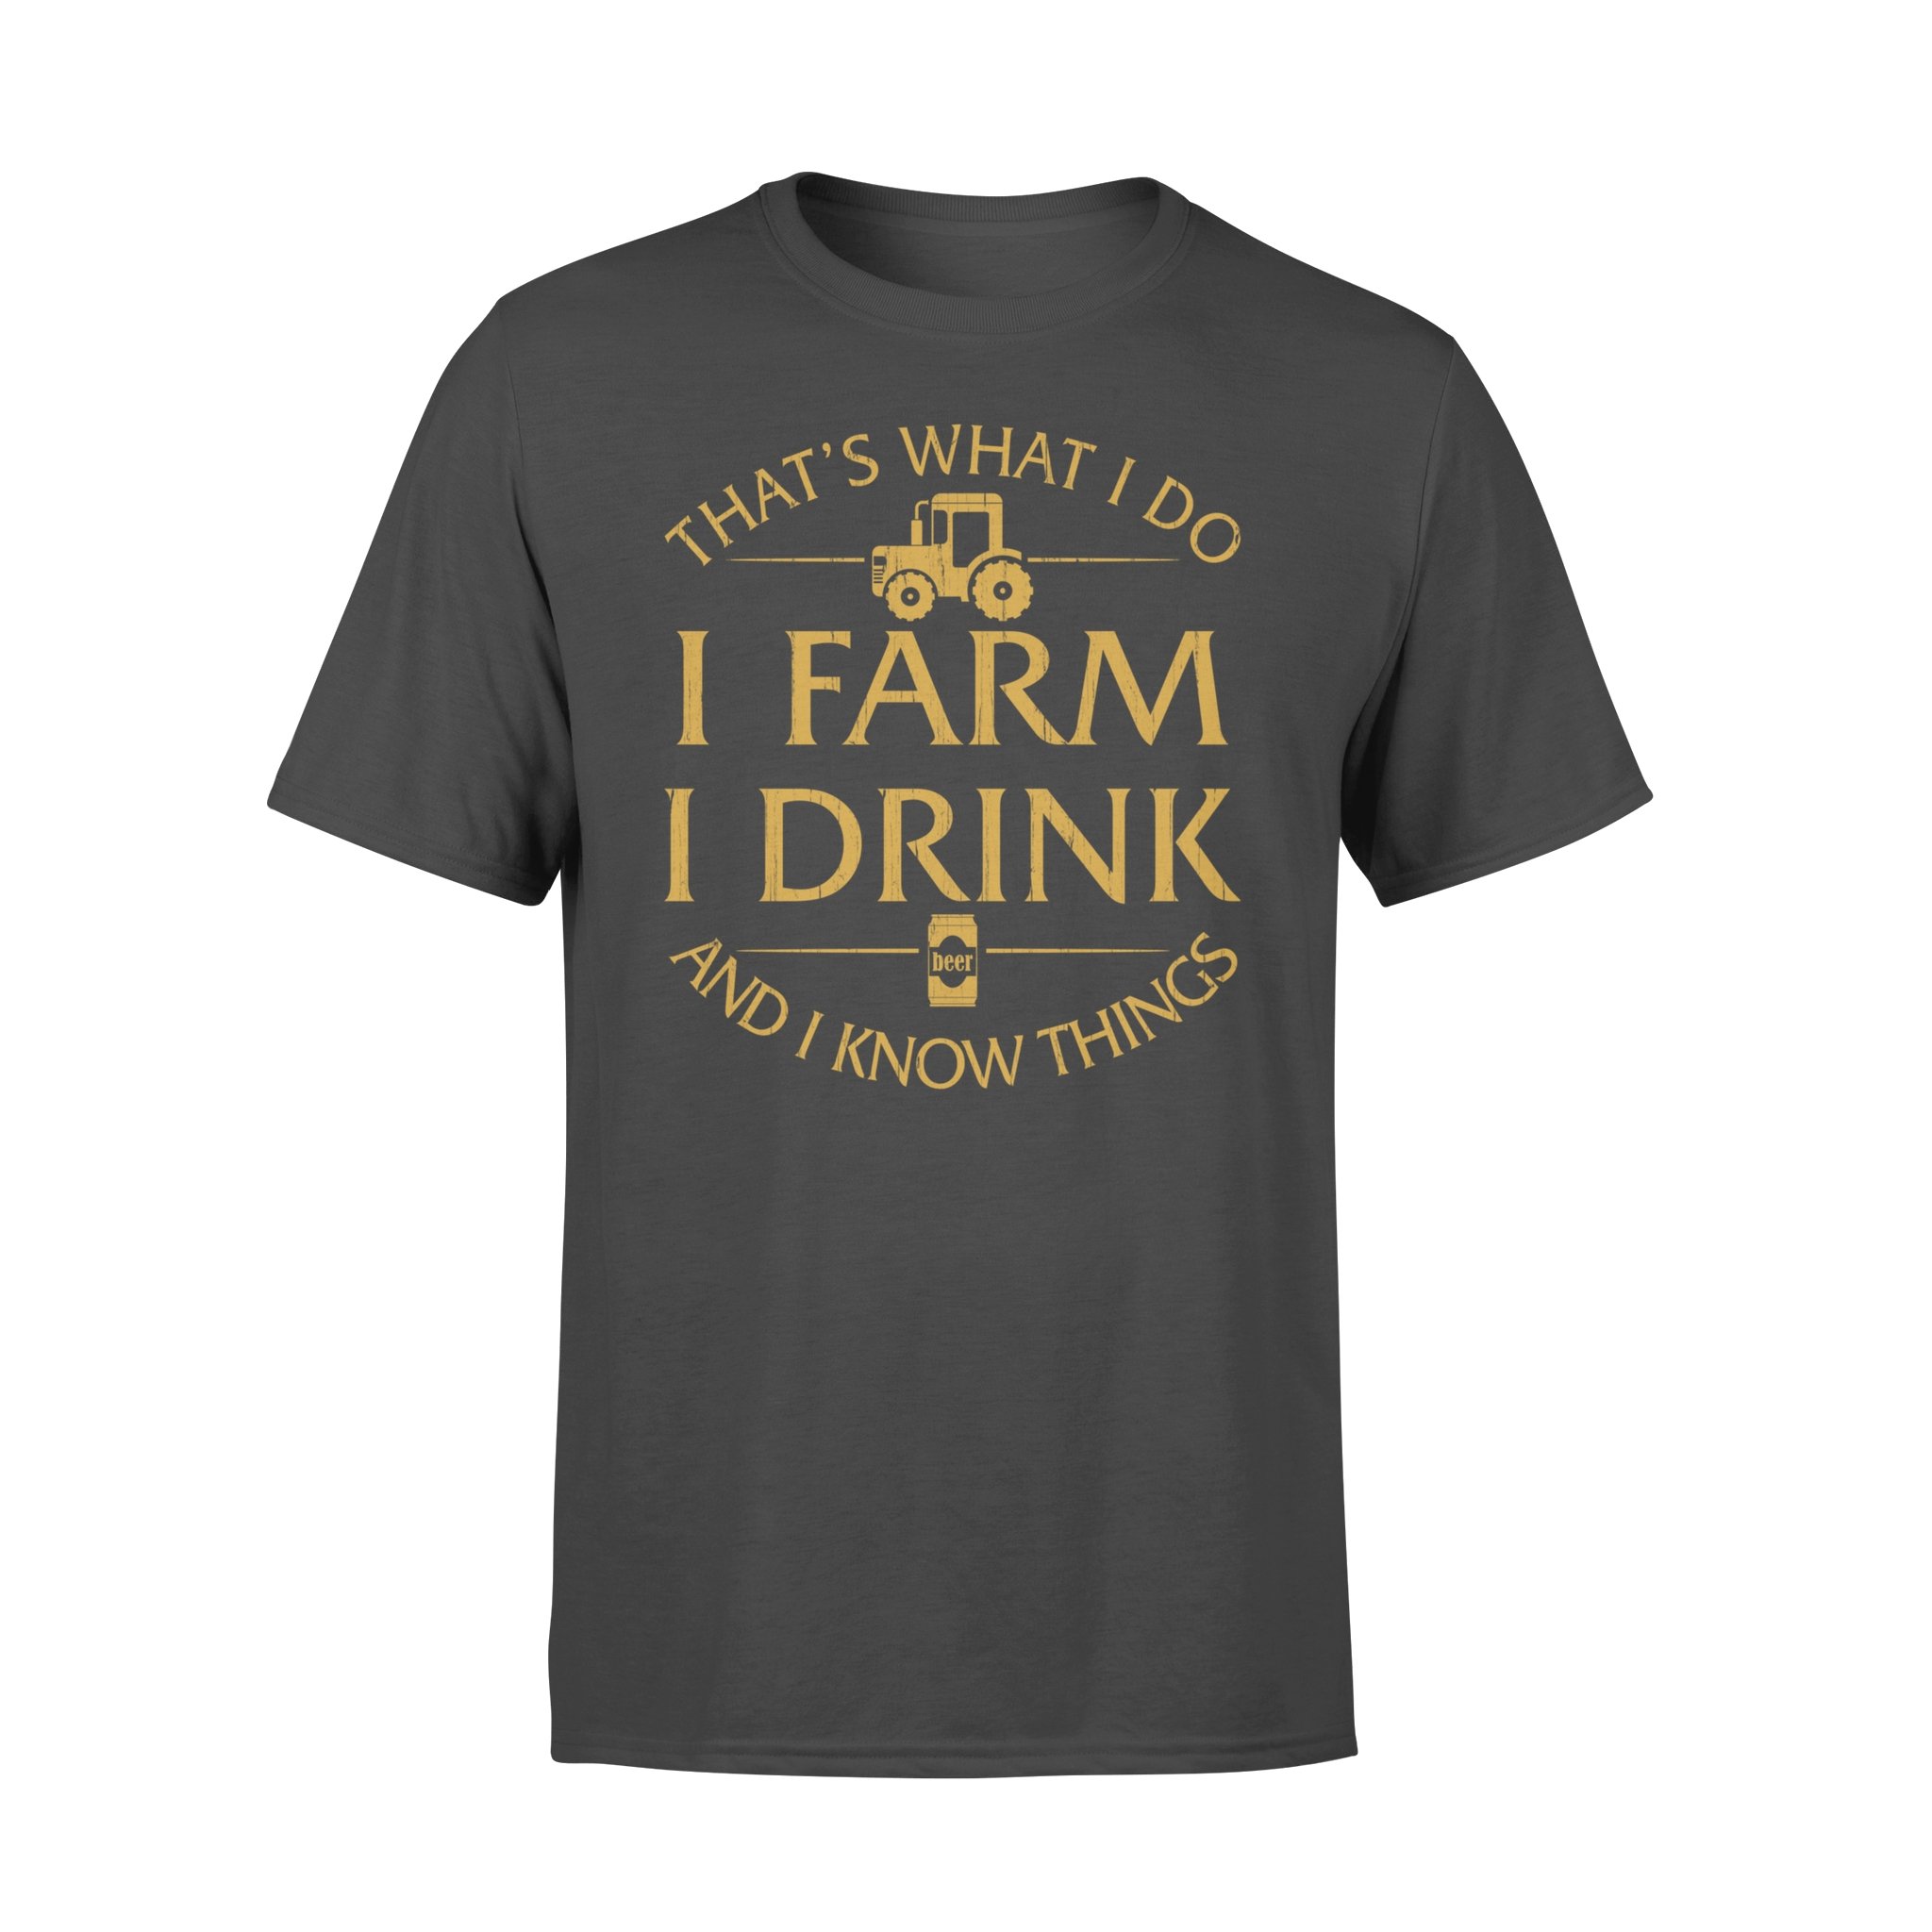 That s What I Do I Farm I Drink Beer And I Know Things Shirt – Premium T-shirt